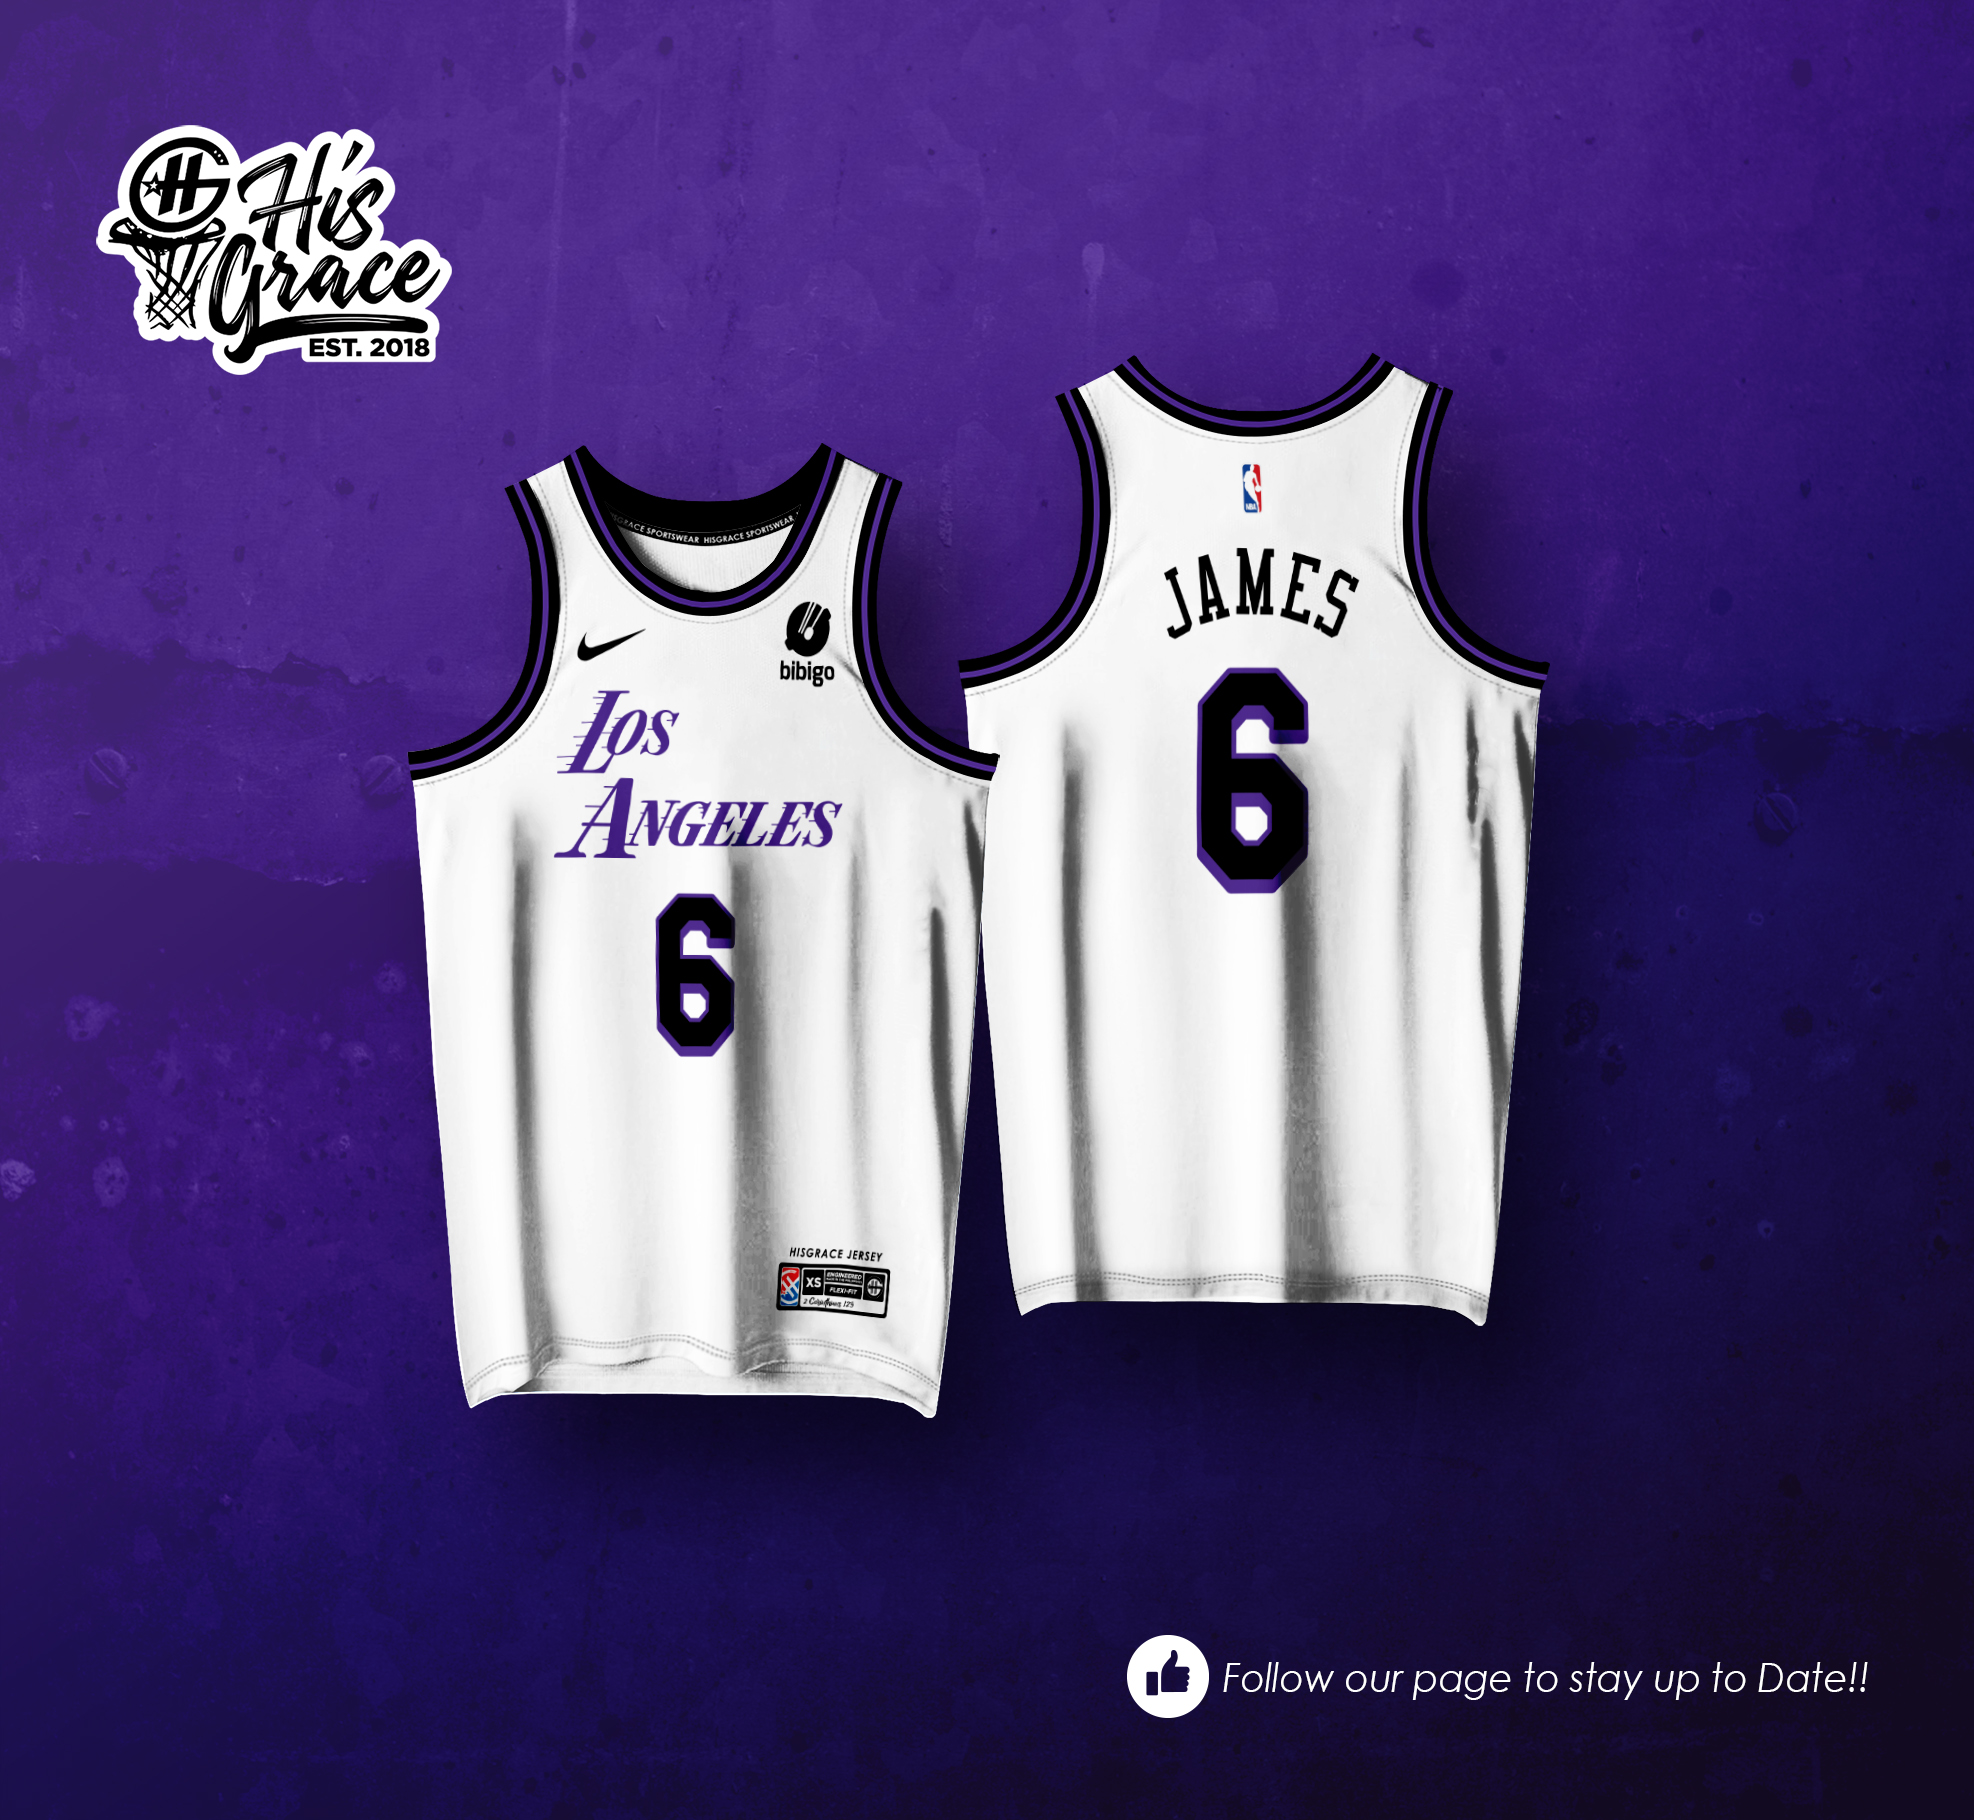 141 HG BLACK YELLOW LAKERS CONCEPT JERSEY FULL SUBLIMATION JERSEY